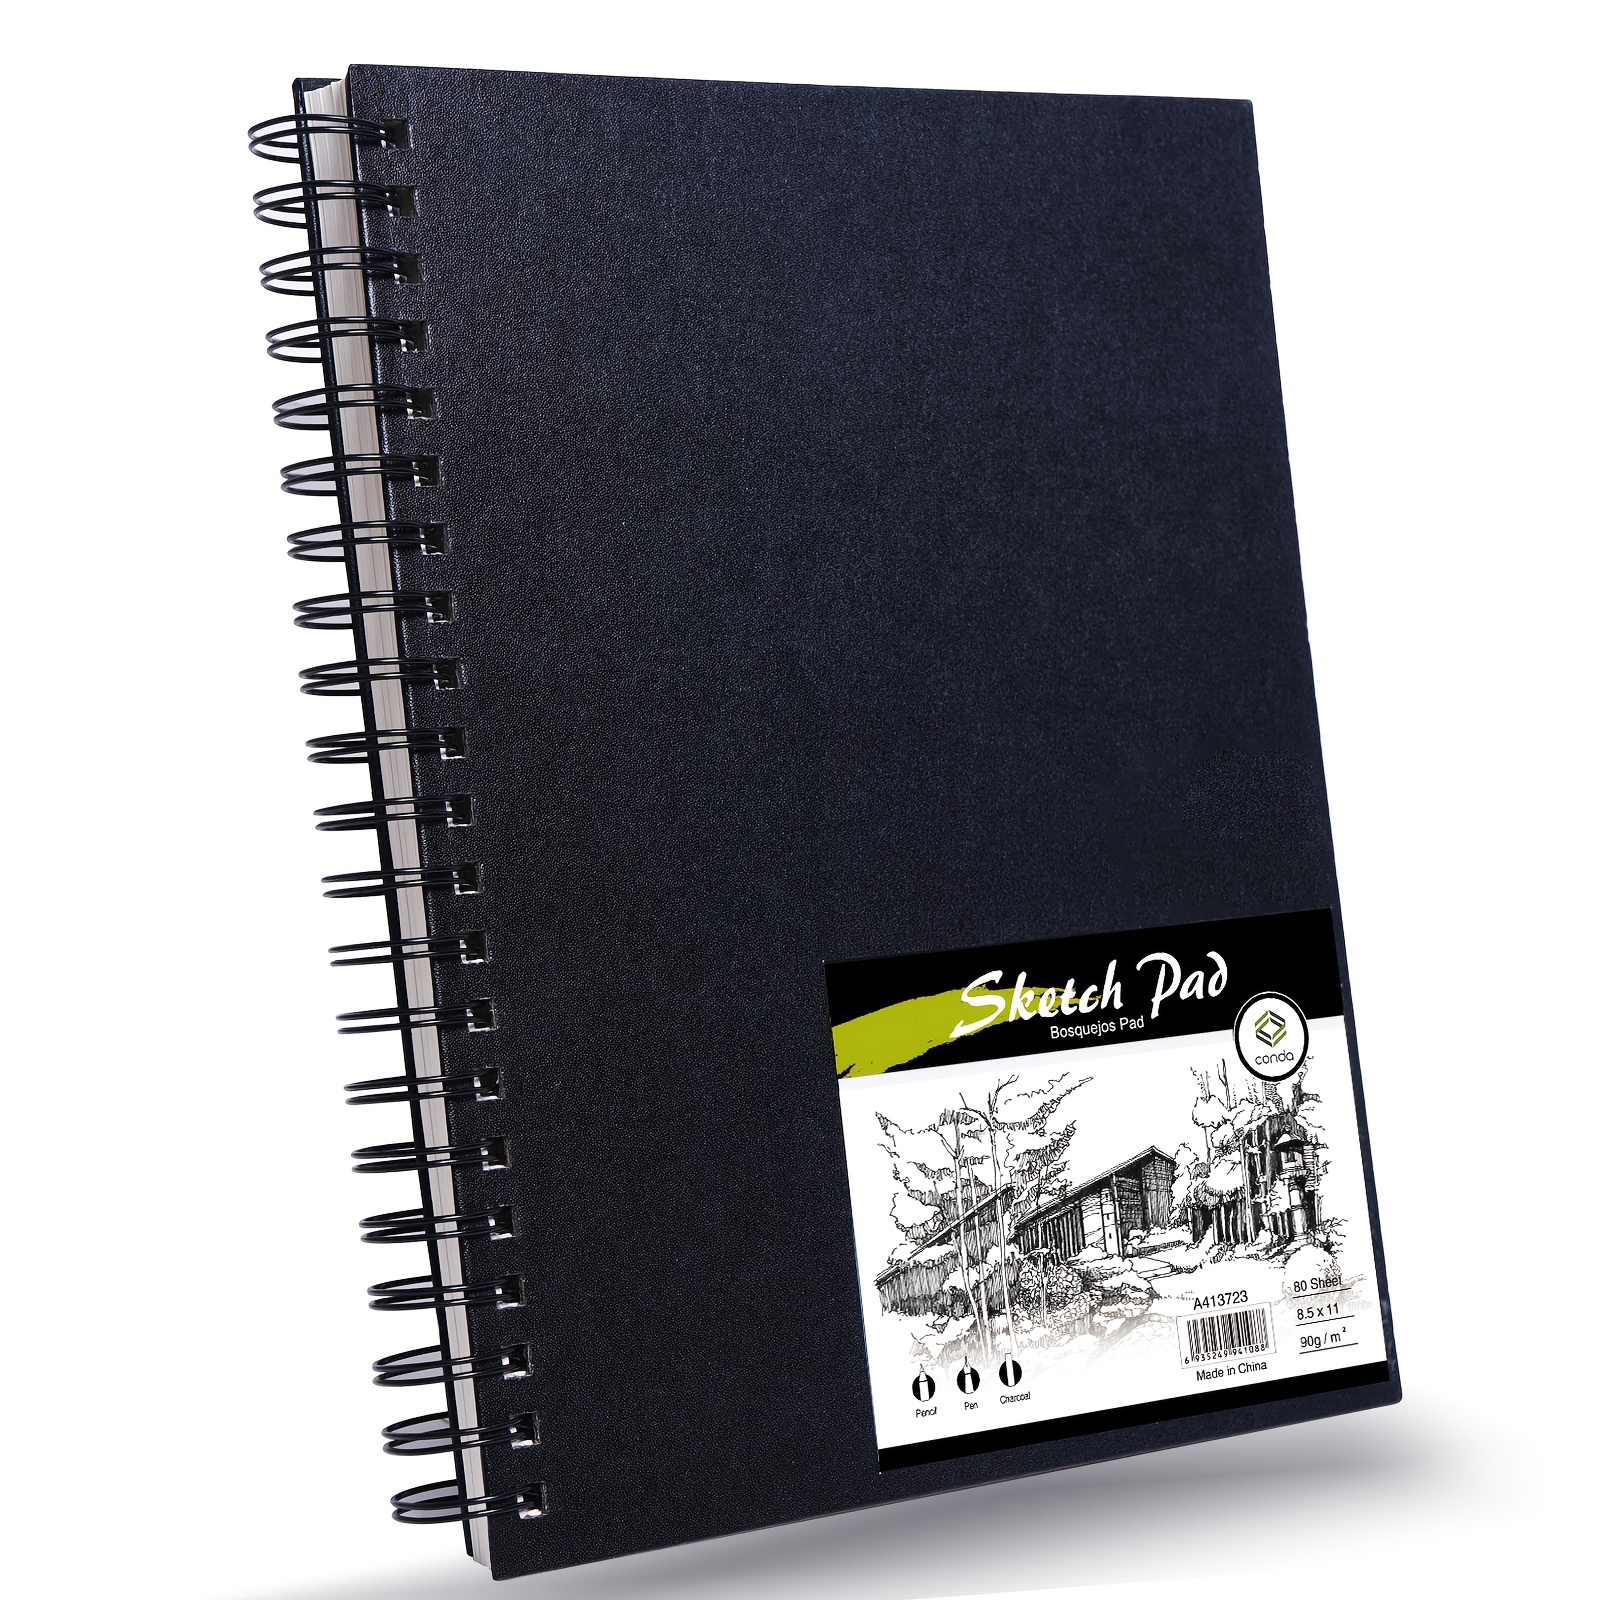 9 Pack Sketch Book 5.5 x 8.3 Inch Artist Sketchpad Bulk Art Sketchbook 100  Sheets Each Side Spiral Wire Bound Sketching Drawing Painting Paper for